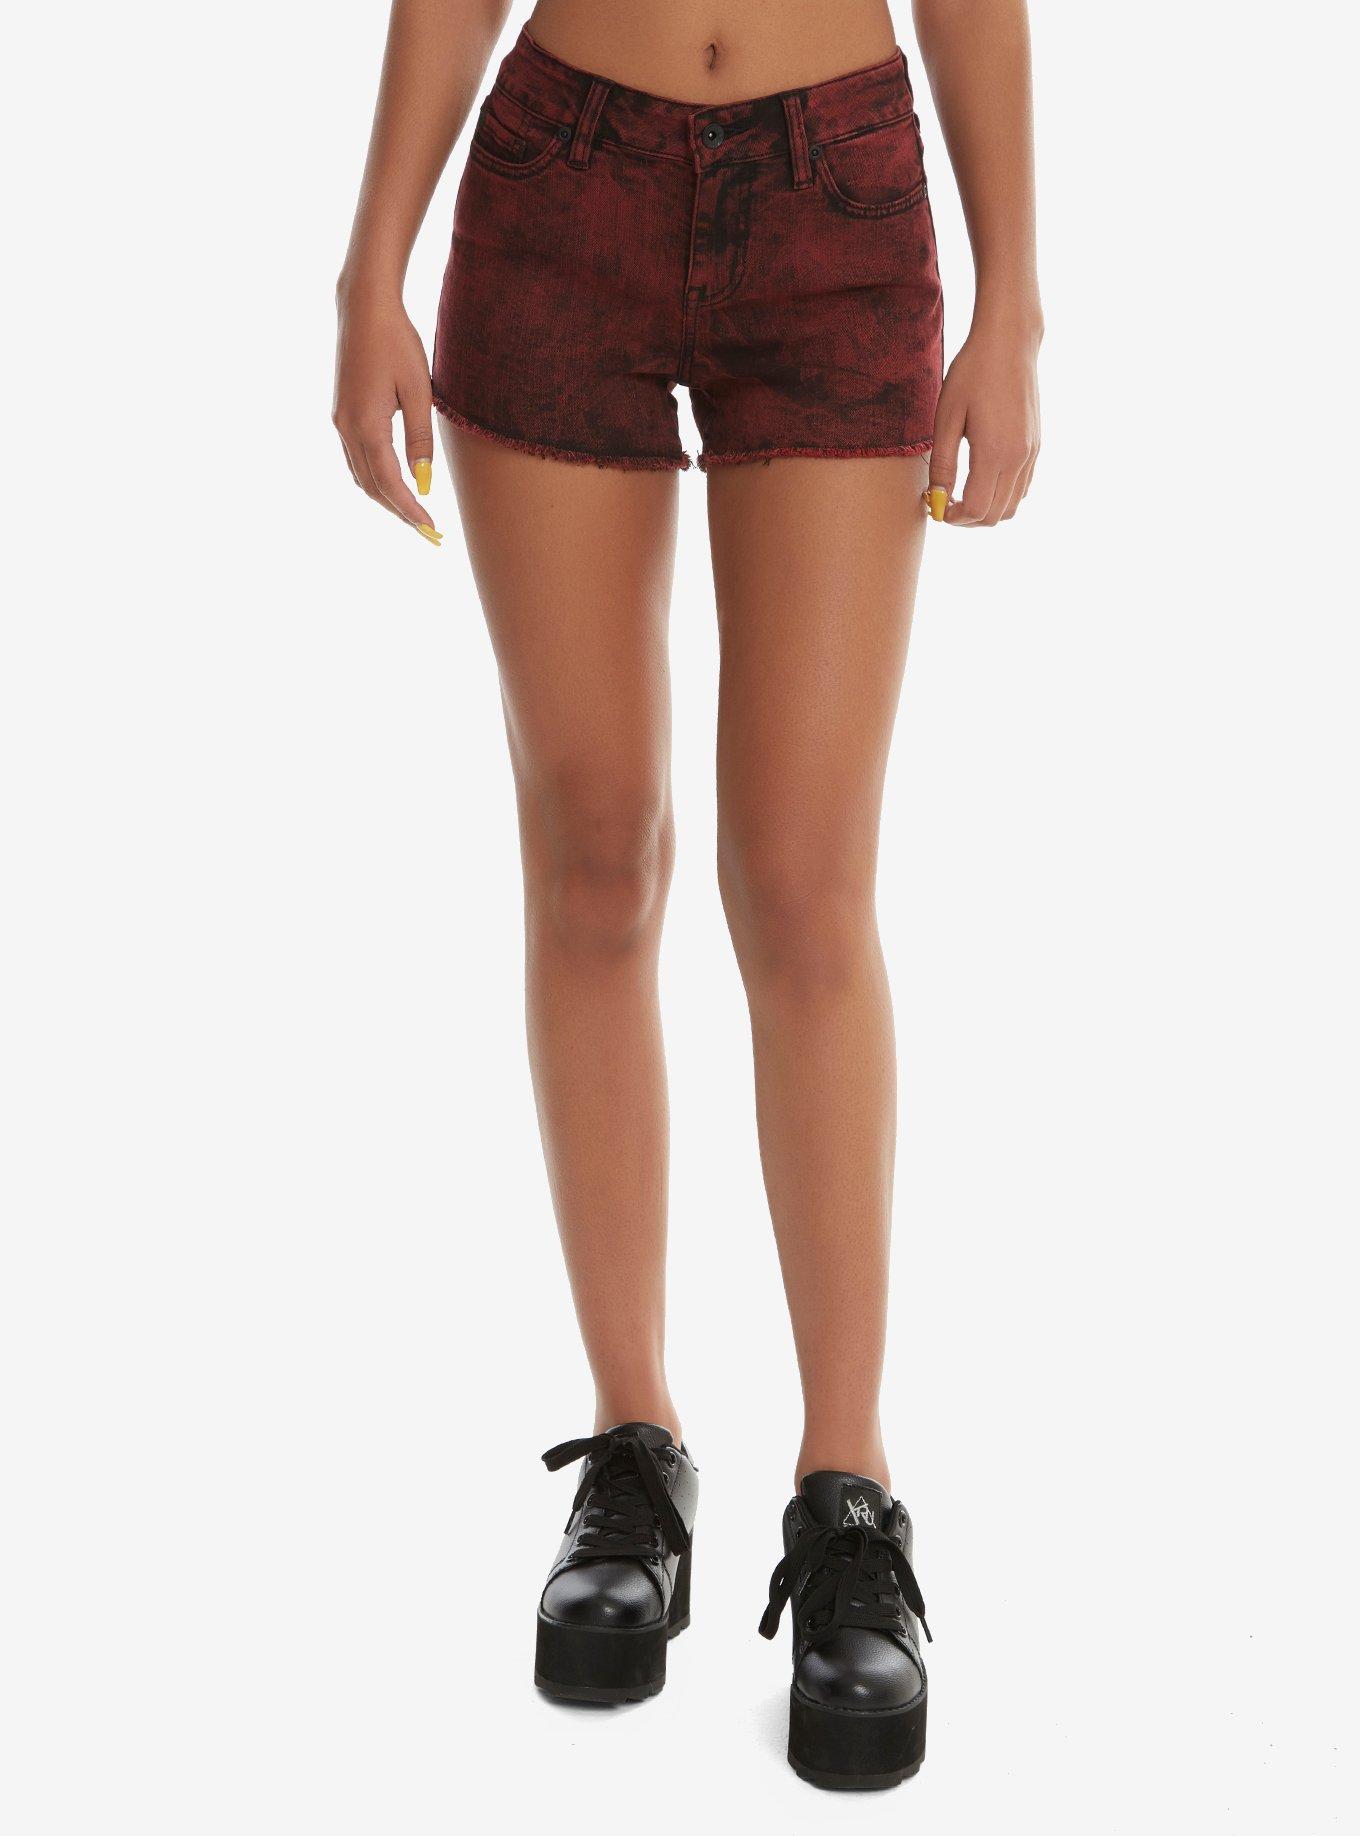 Blackheart Red Wash Low Rise Shorts, RED, hi-res